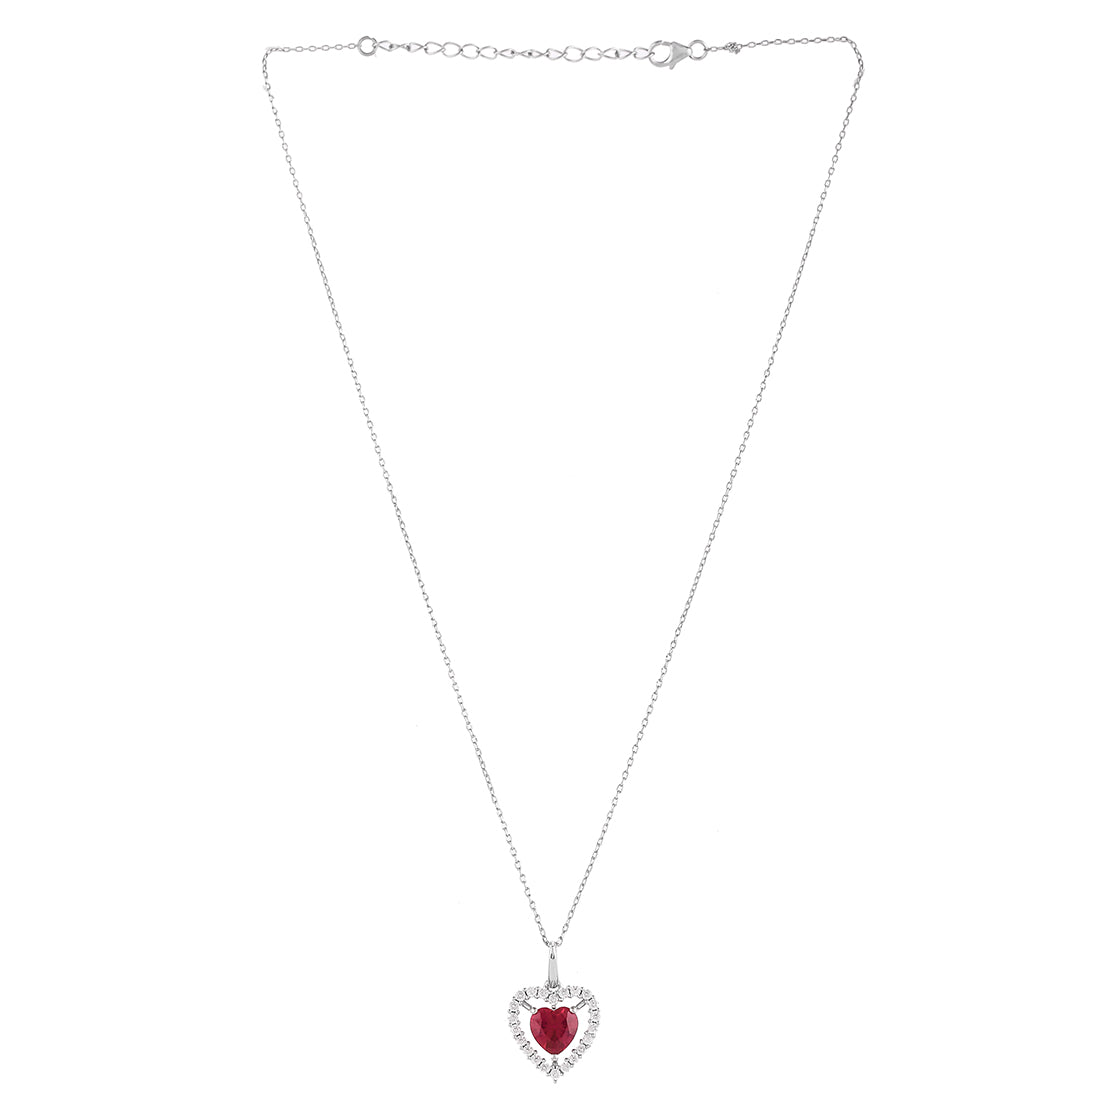 Women's Silver And Red Heart Shaped Pendant - Voylla